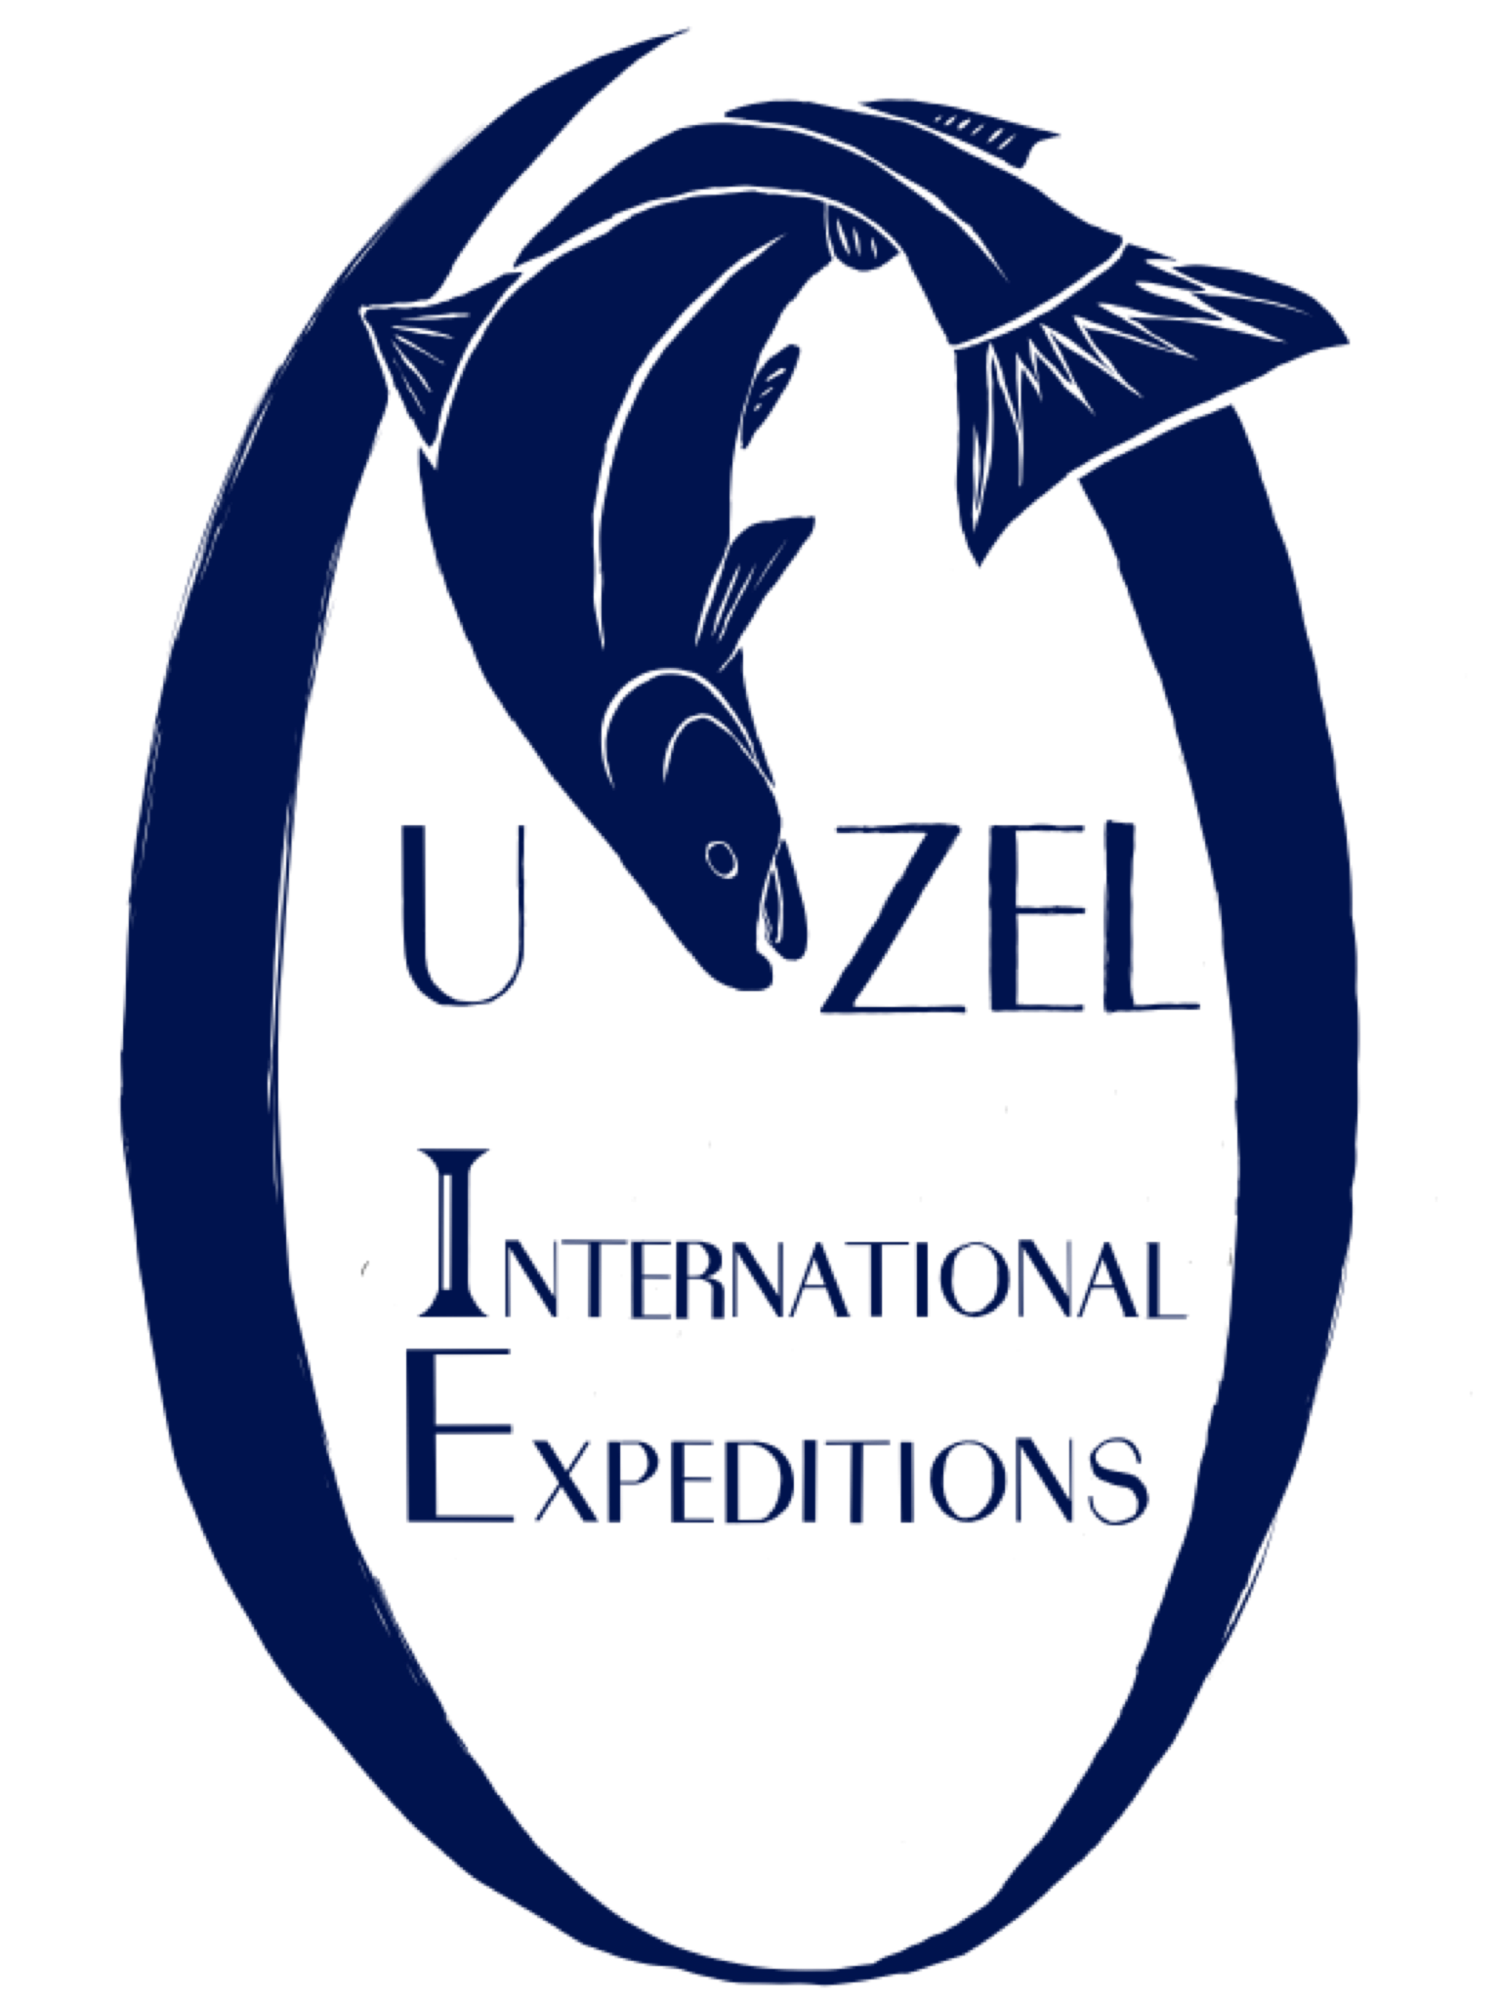 Ouzel Expeditions